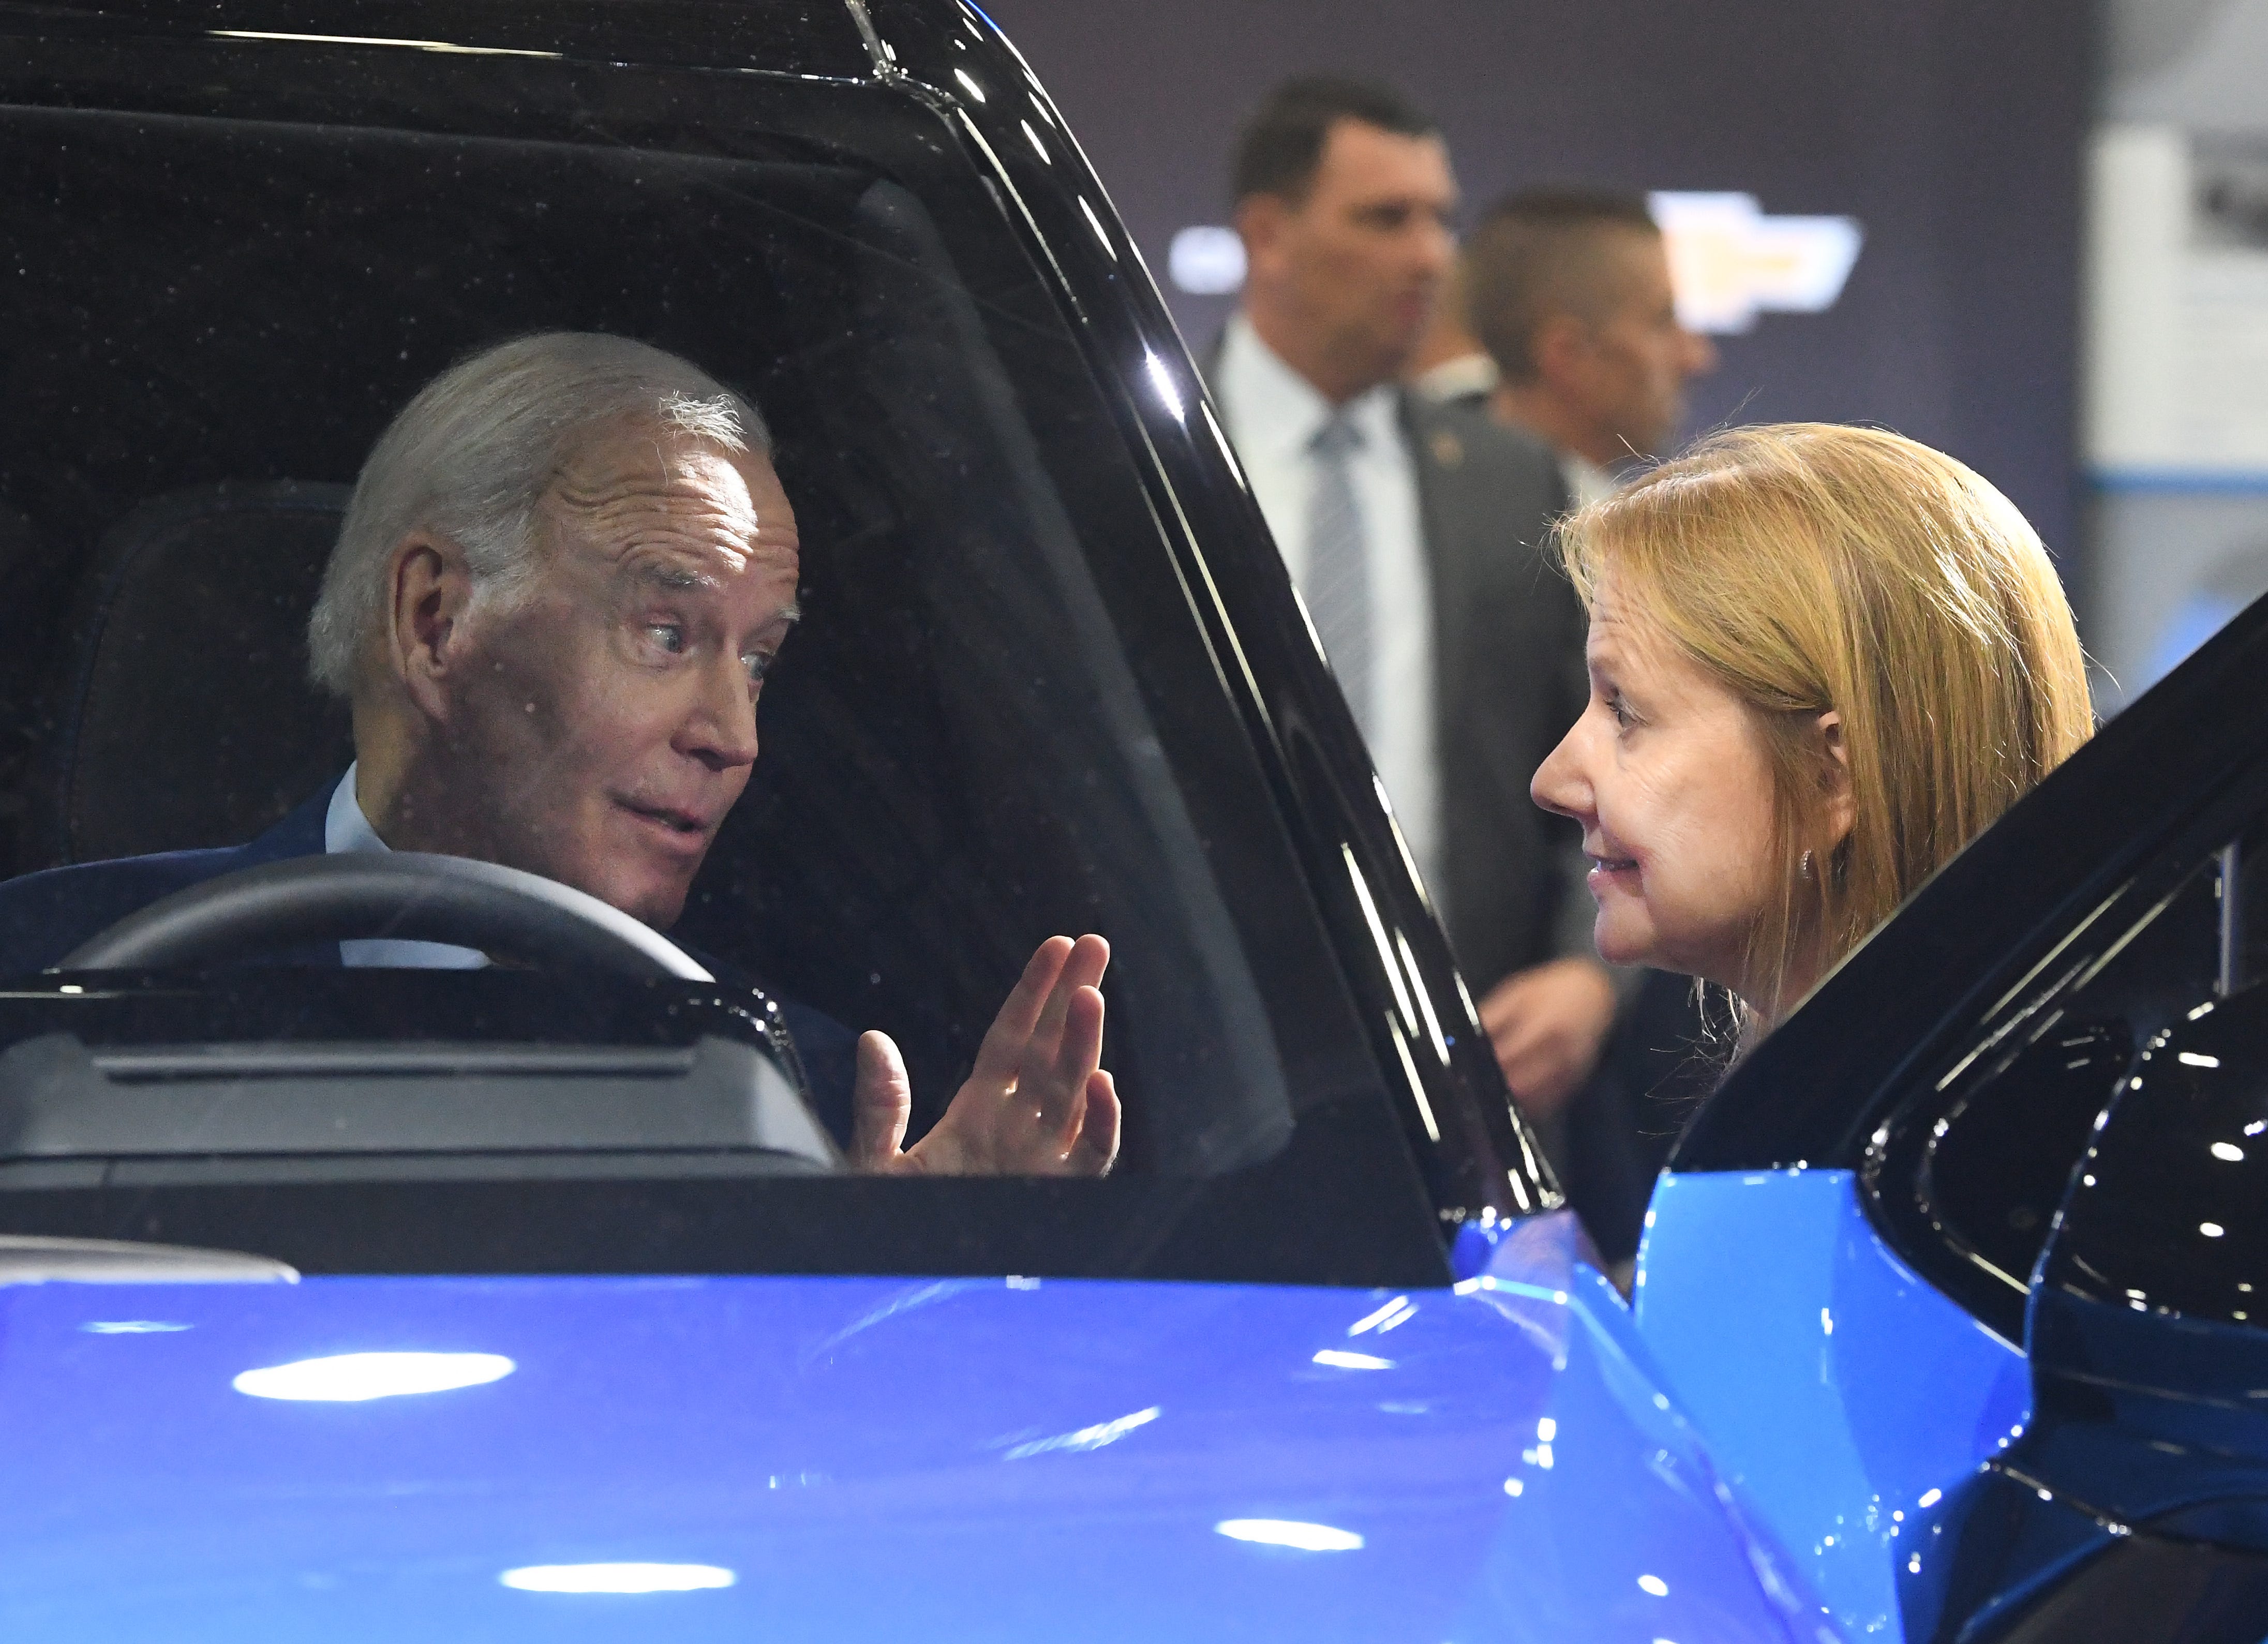 President Joe Biden sits in a Silverado EV, talking with General Motors chair and chief executive officer Mary Barra at the GM display during a tour of the 2022 North American International Auto Show in Detroit, Michigan on September 14, 2022.